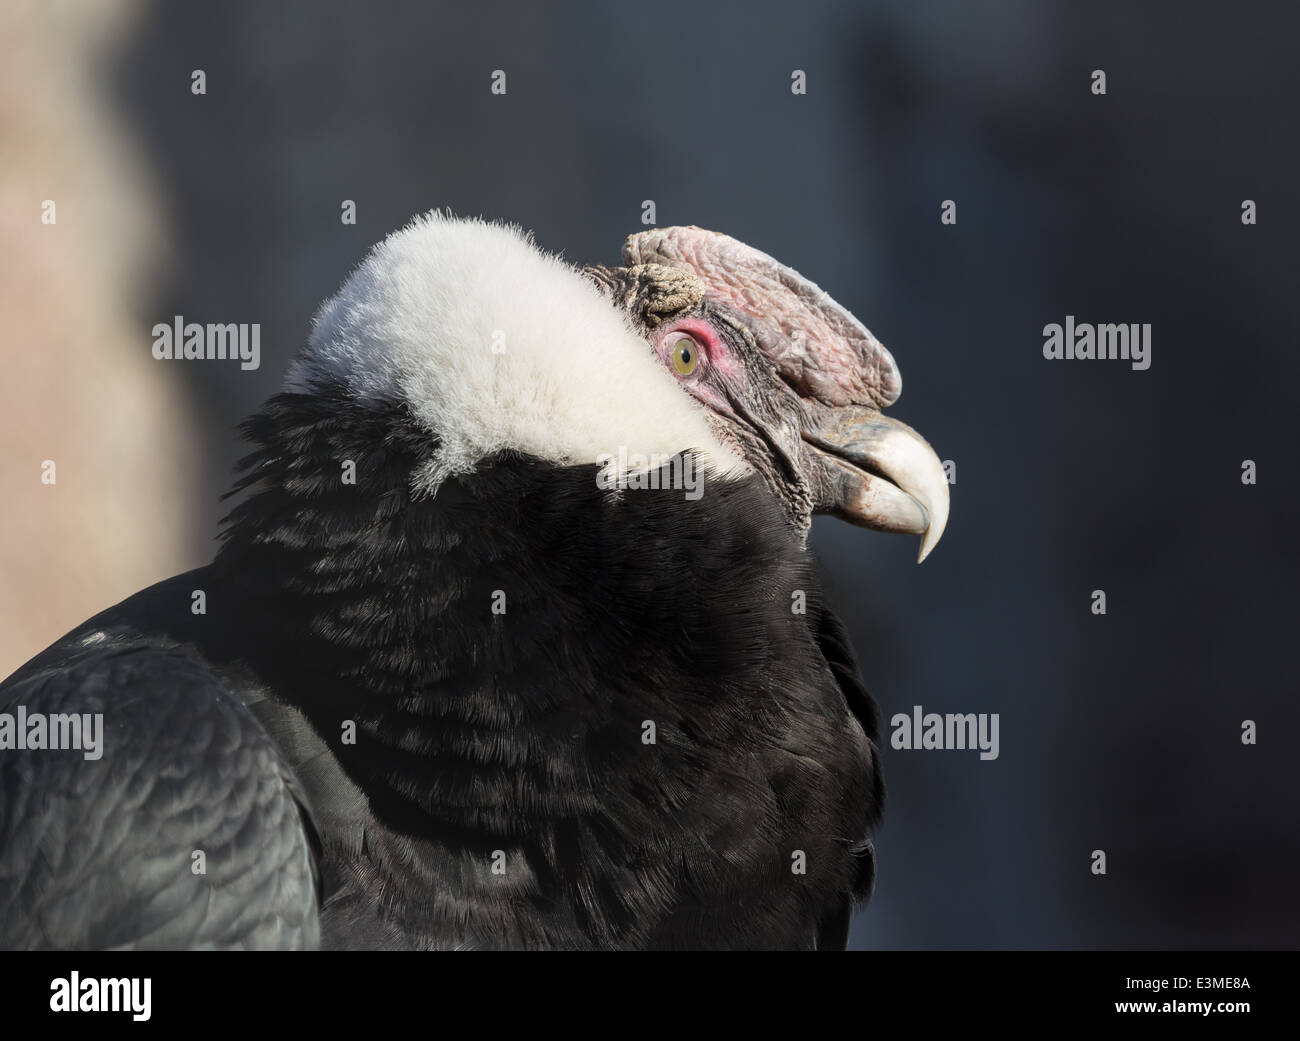 Andean Condor close up basking in the sun Stock Photo